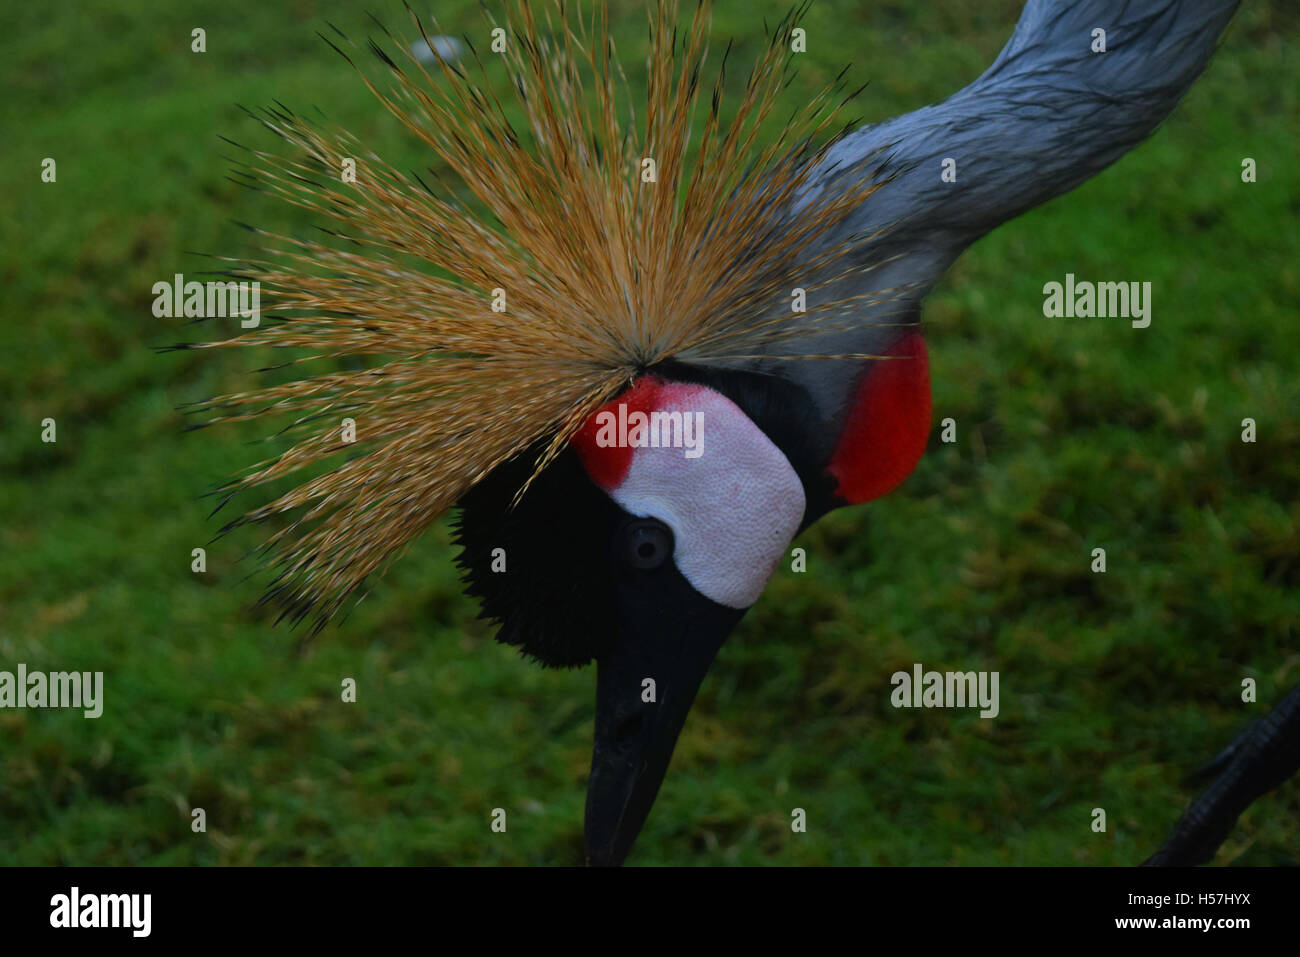 The golden crowned crane - an example of a crested bird species Stock Photo